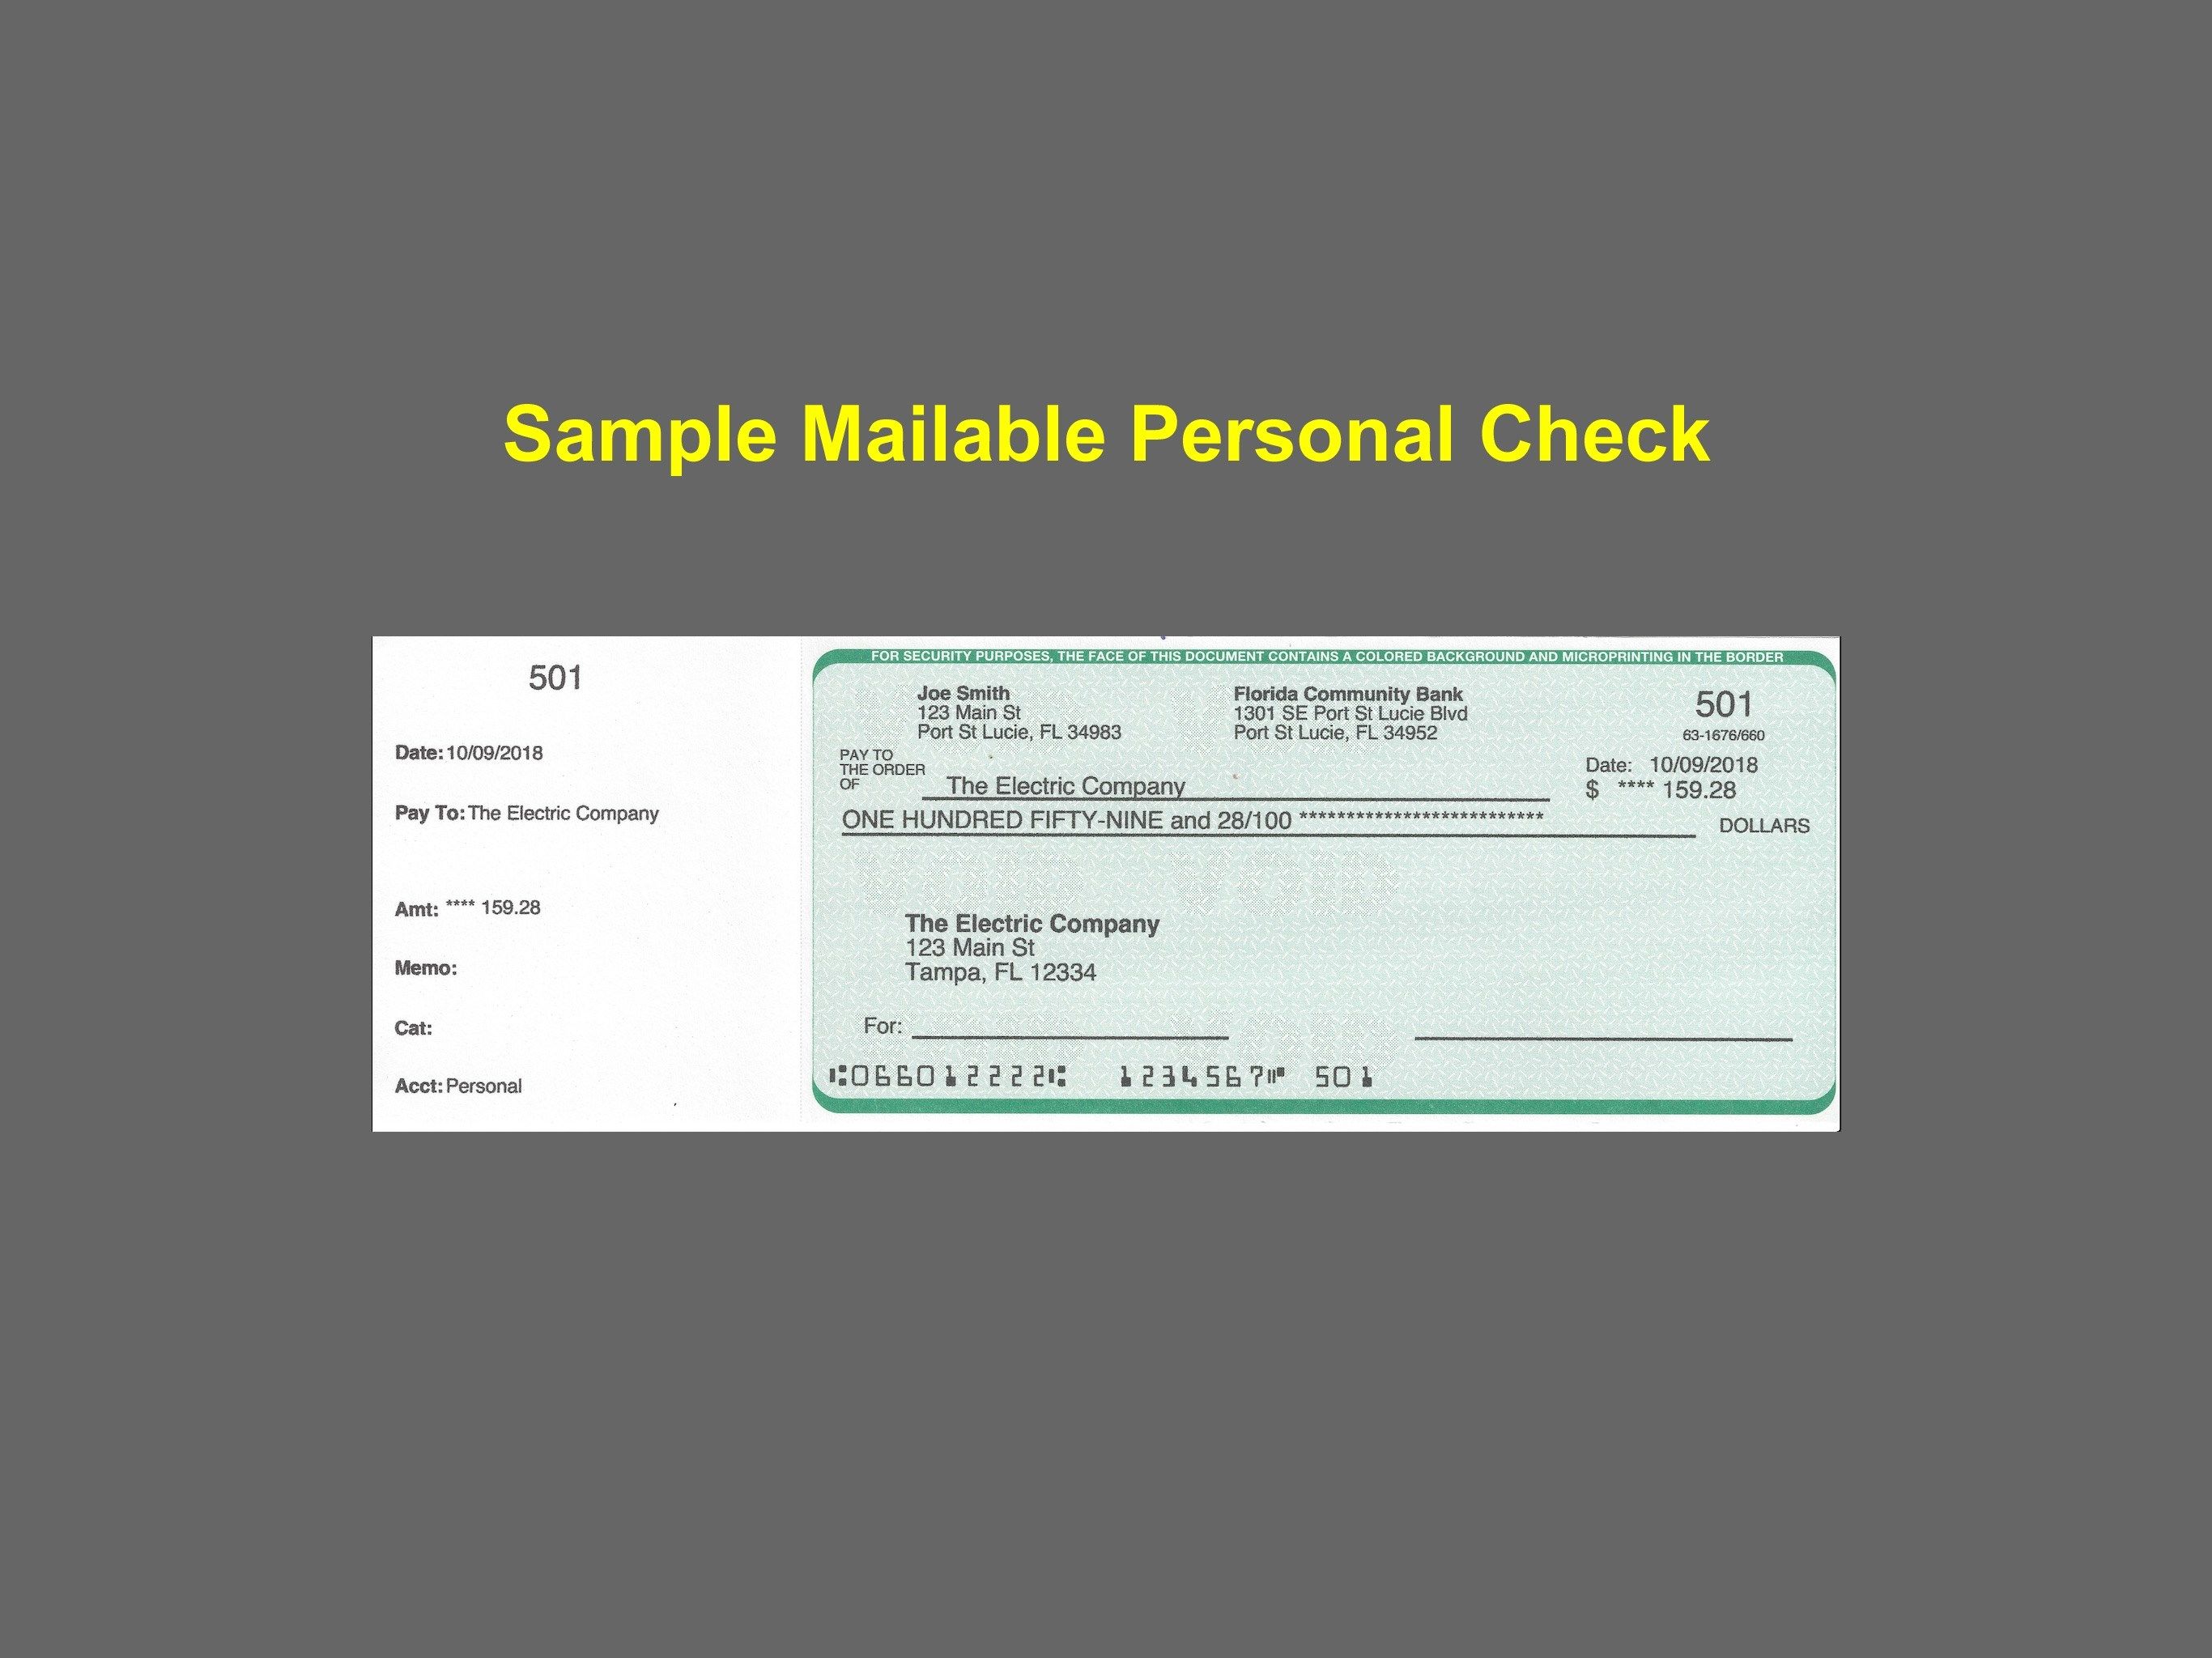 Mailable personal format. Addresses show in #6 2-window envelopes